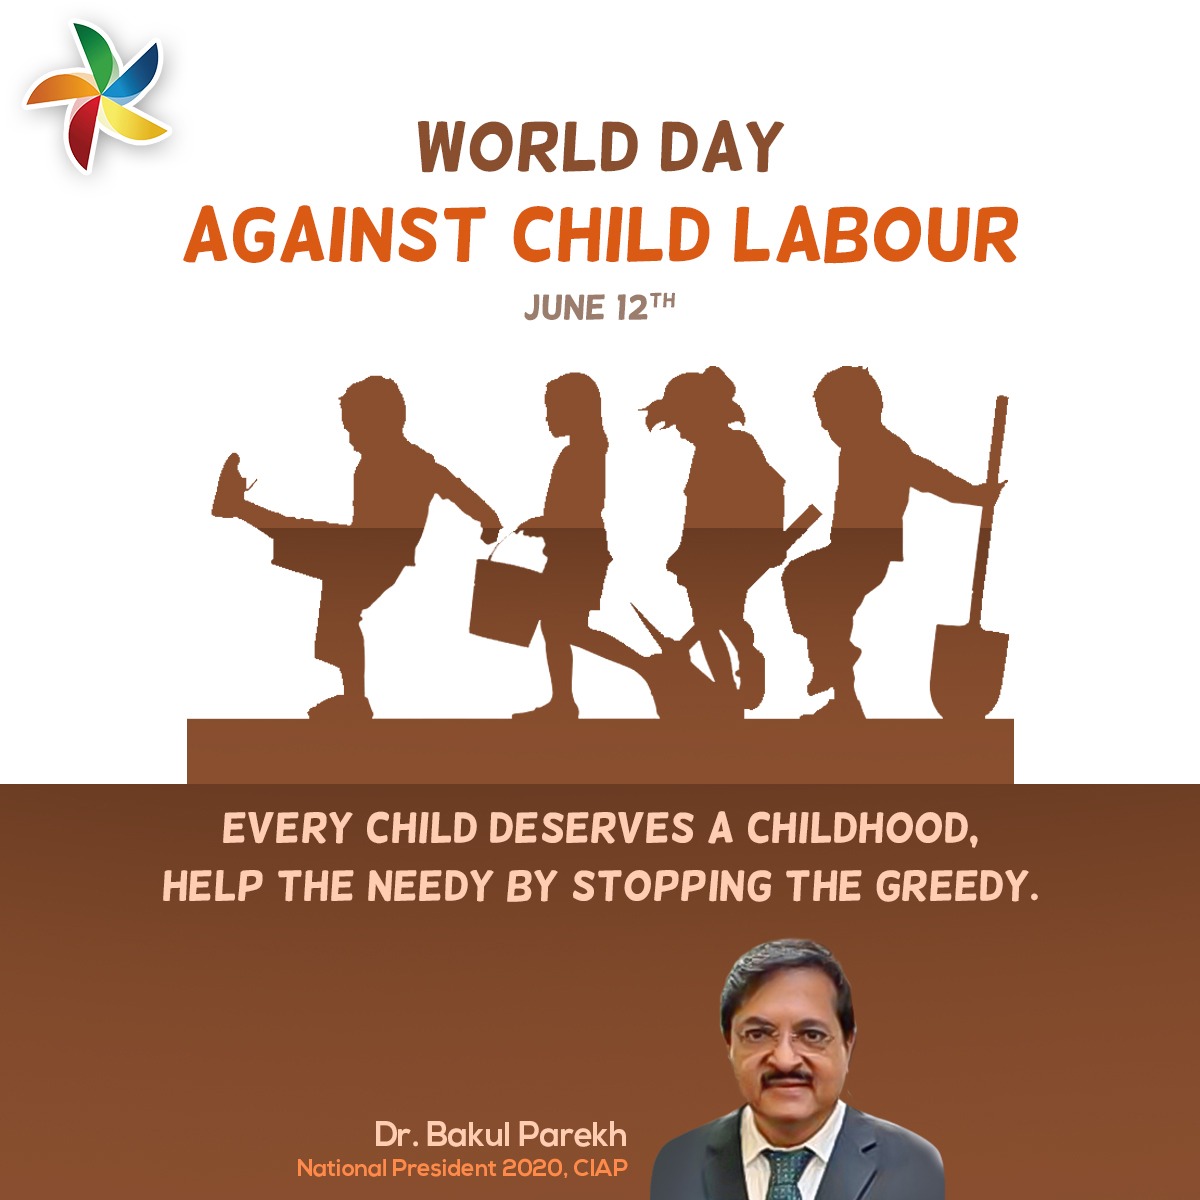 Every child deserves a chance to chase their dreams. This 𝐖𝐨𝐫𝐥𝐝 𝐃𝐚𝐲 𝐀𝐠𝐚𝐢𝐧𝐬𝐭 𝐂𝐡𝐢𝐥𝐝 𝐋𝐚𝐛𝐨𝐮𝐫, let's stand up against any form of child labor and child abuse.

#WDACL #StopChildLabour #WorldDayAgainstChildLabour2020 #childlabour #AntiChildlabourday